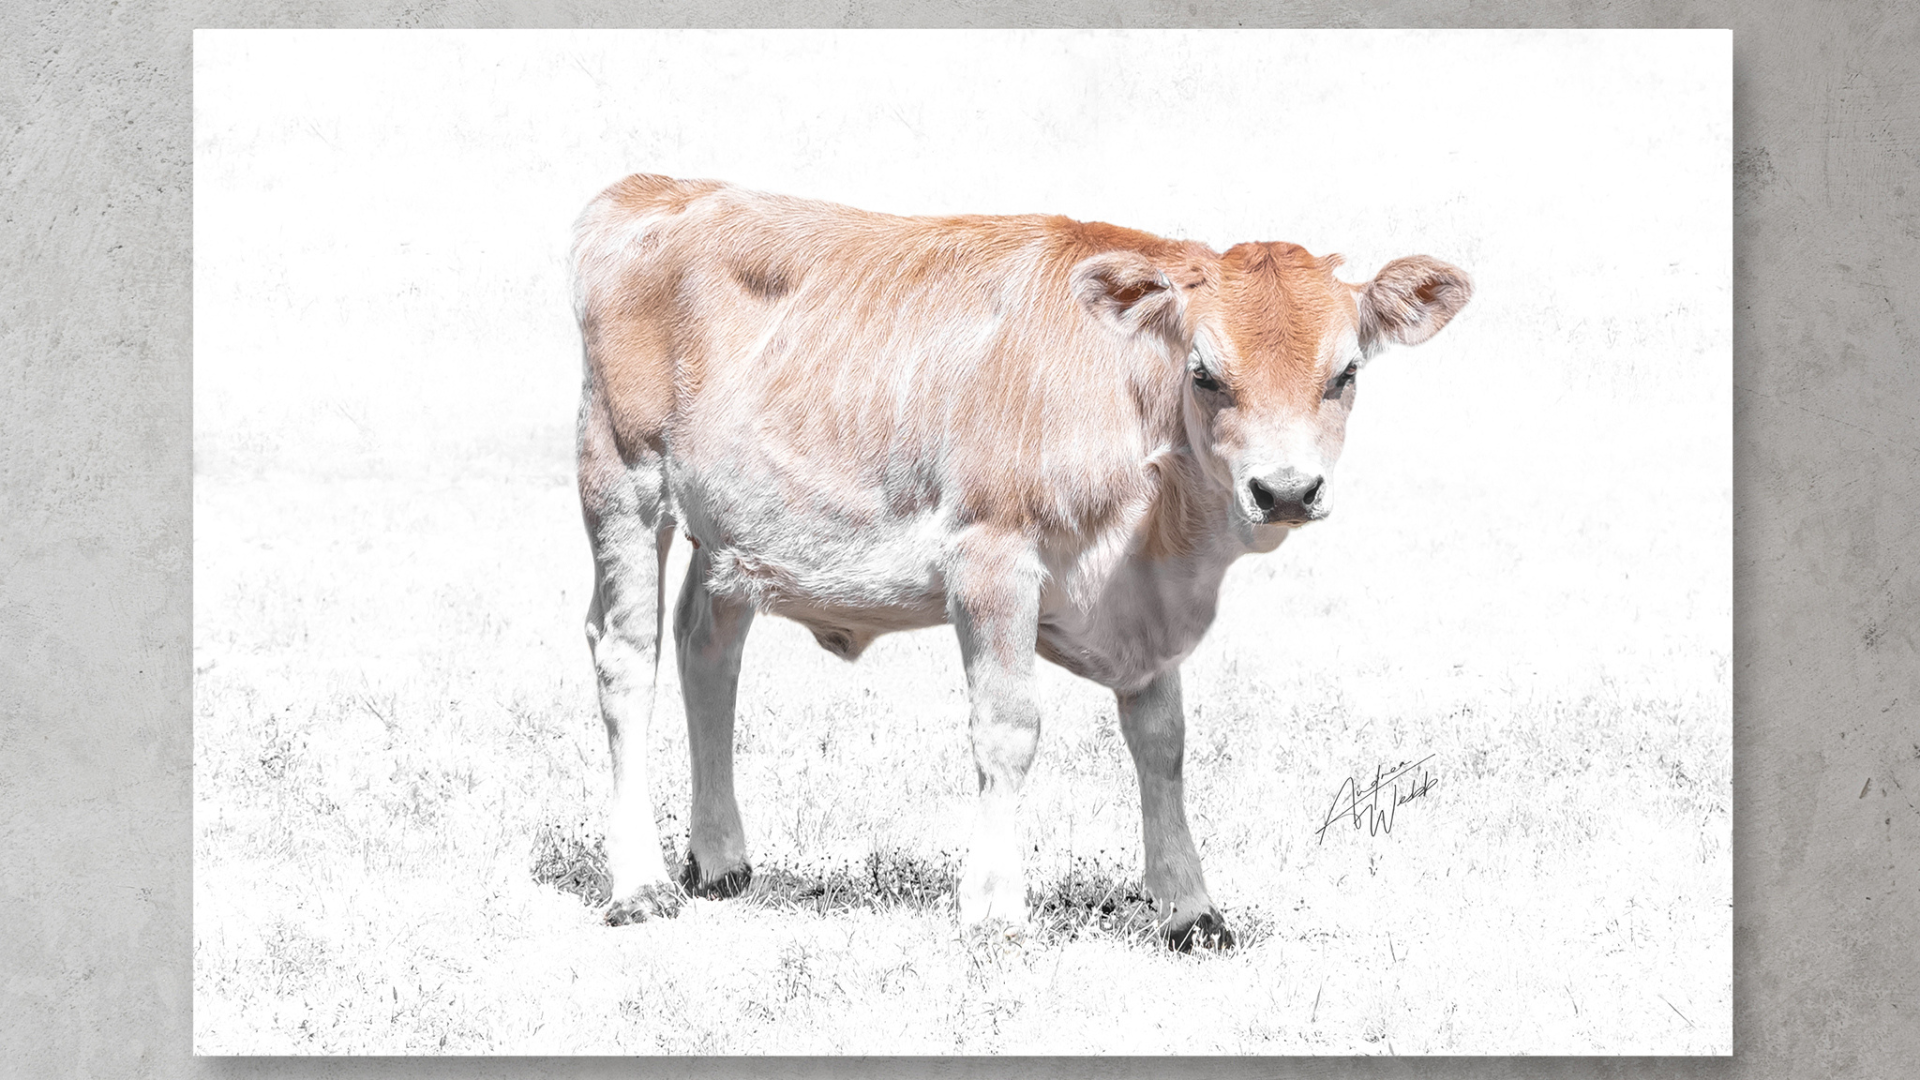 Cow Photography and Animal Photography in Georgia and South Carolina